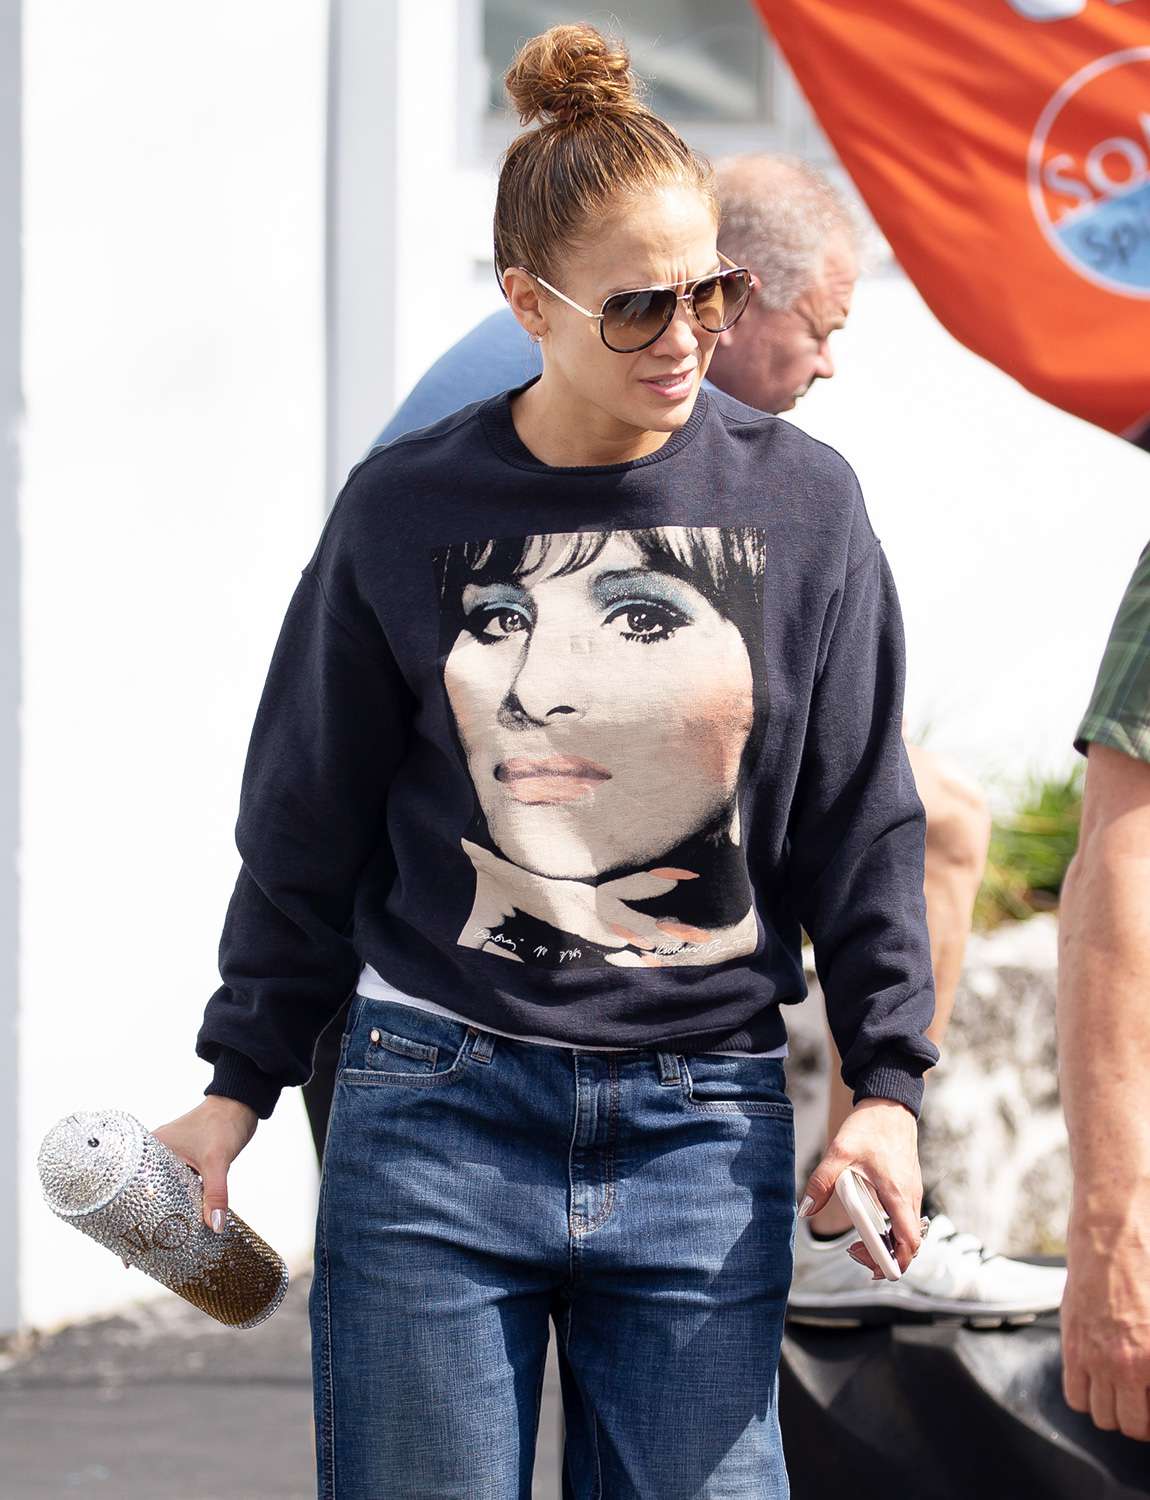 Jennifer Lopez channels her inner Barbara Streisand with a sweatshirt showing the icon